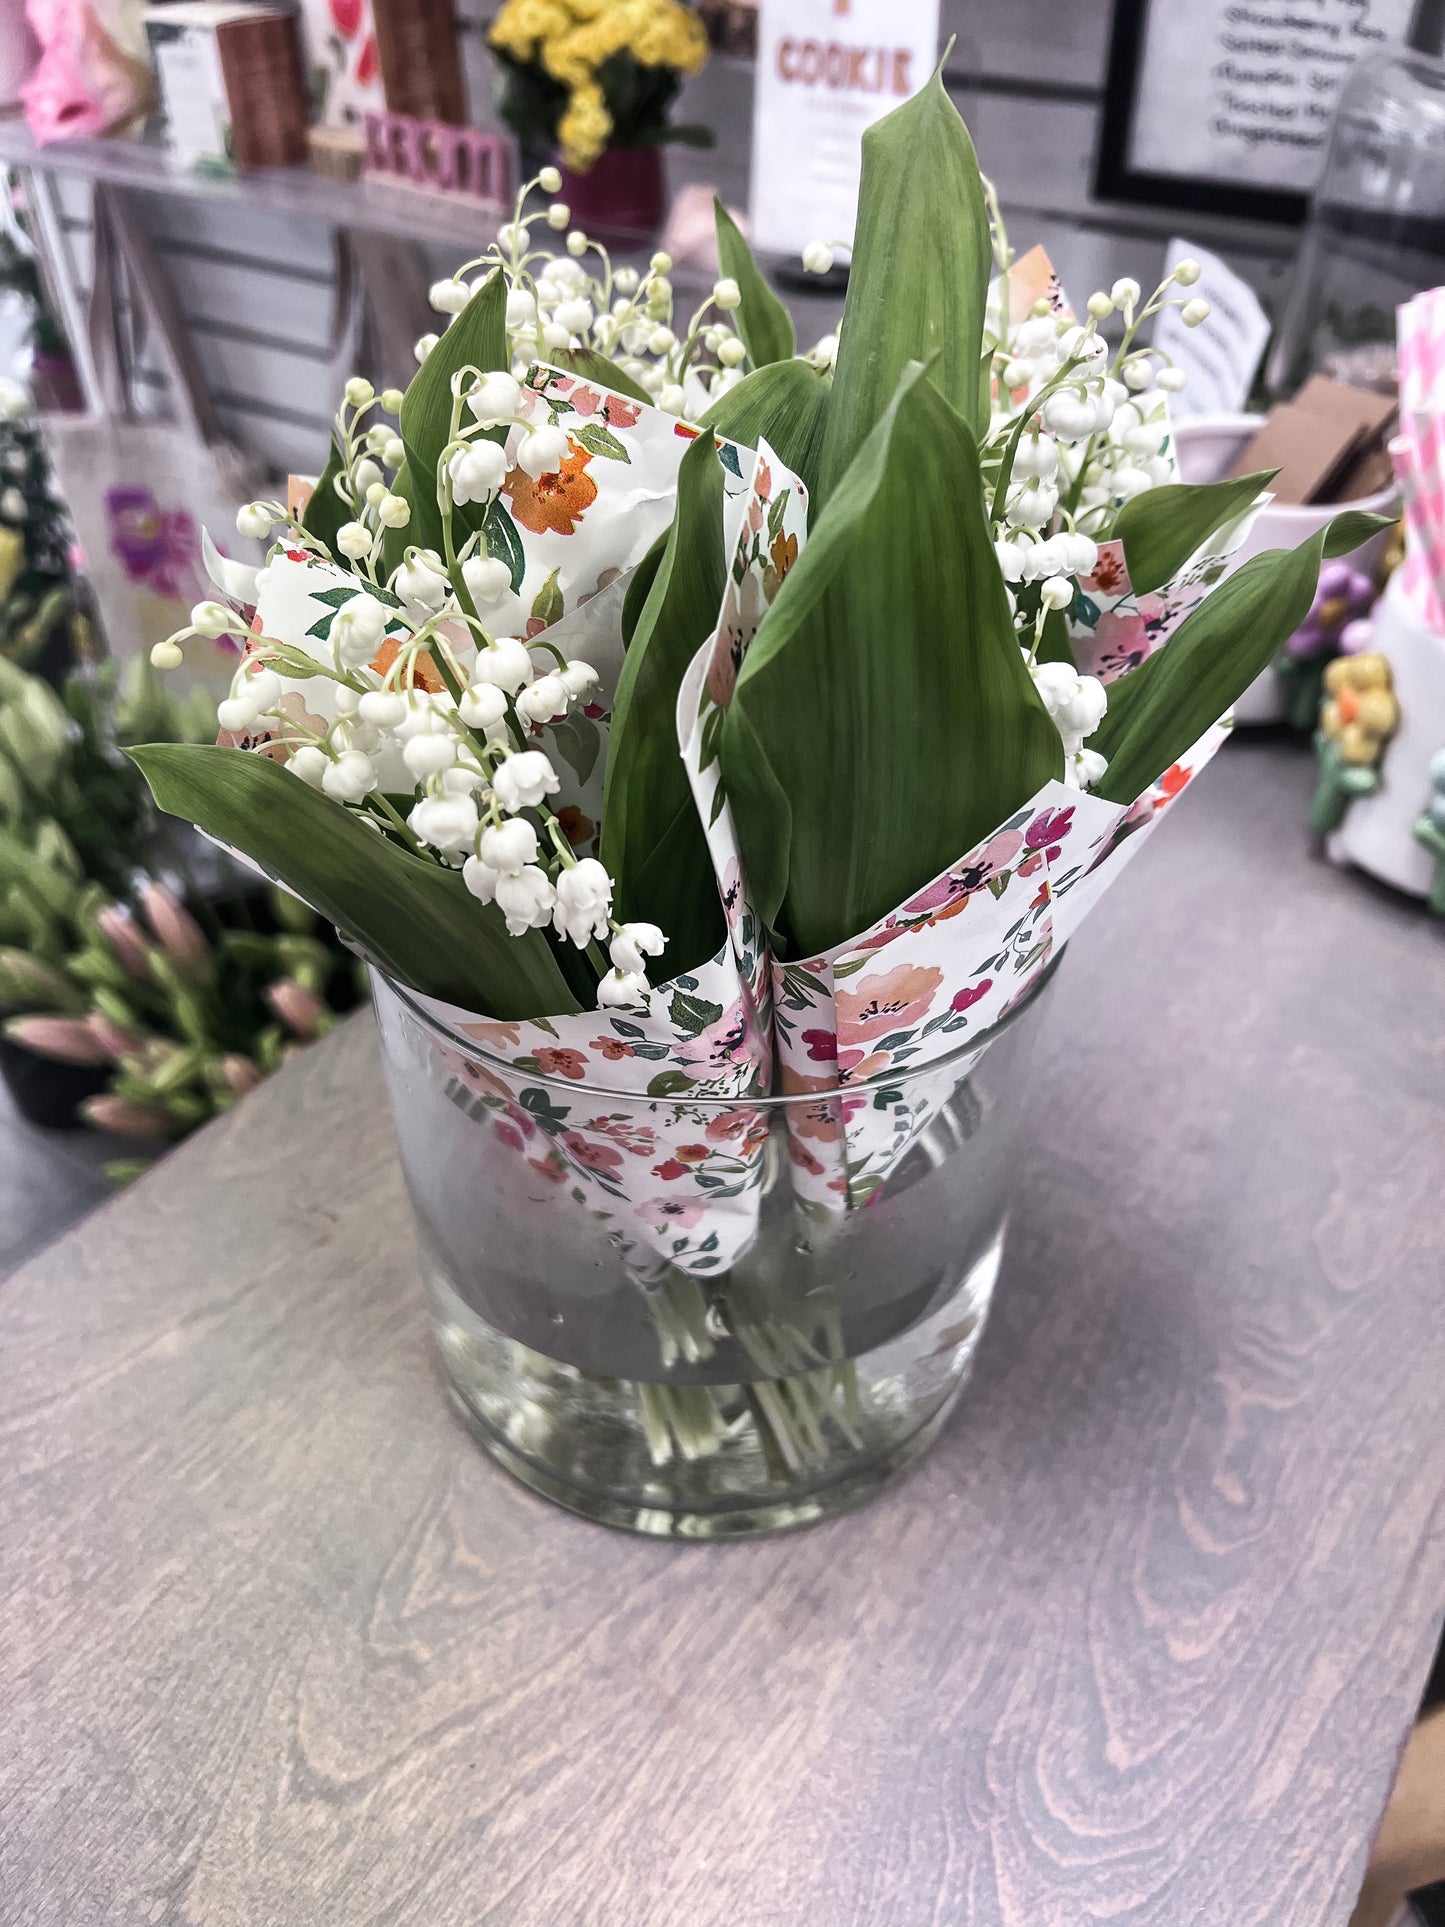 Lily of the valley bouquets